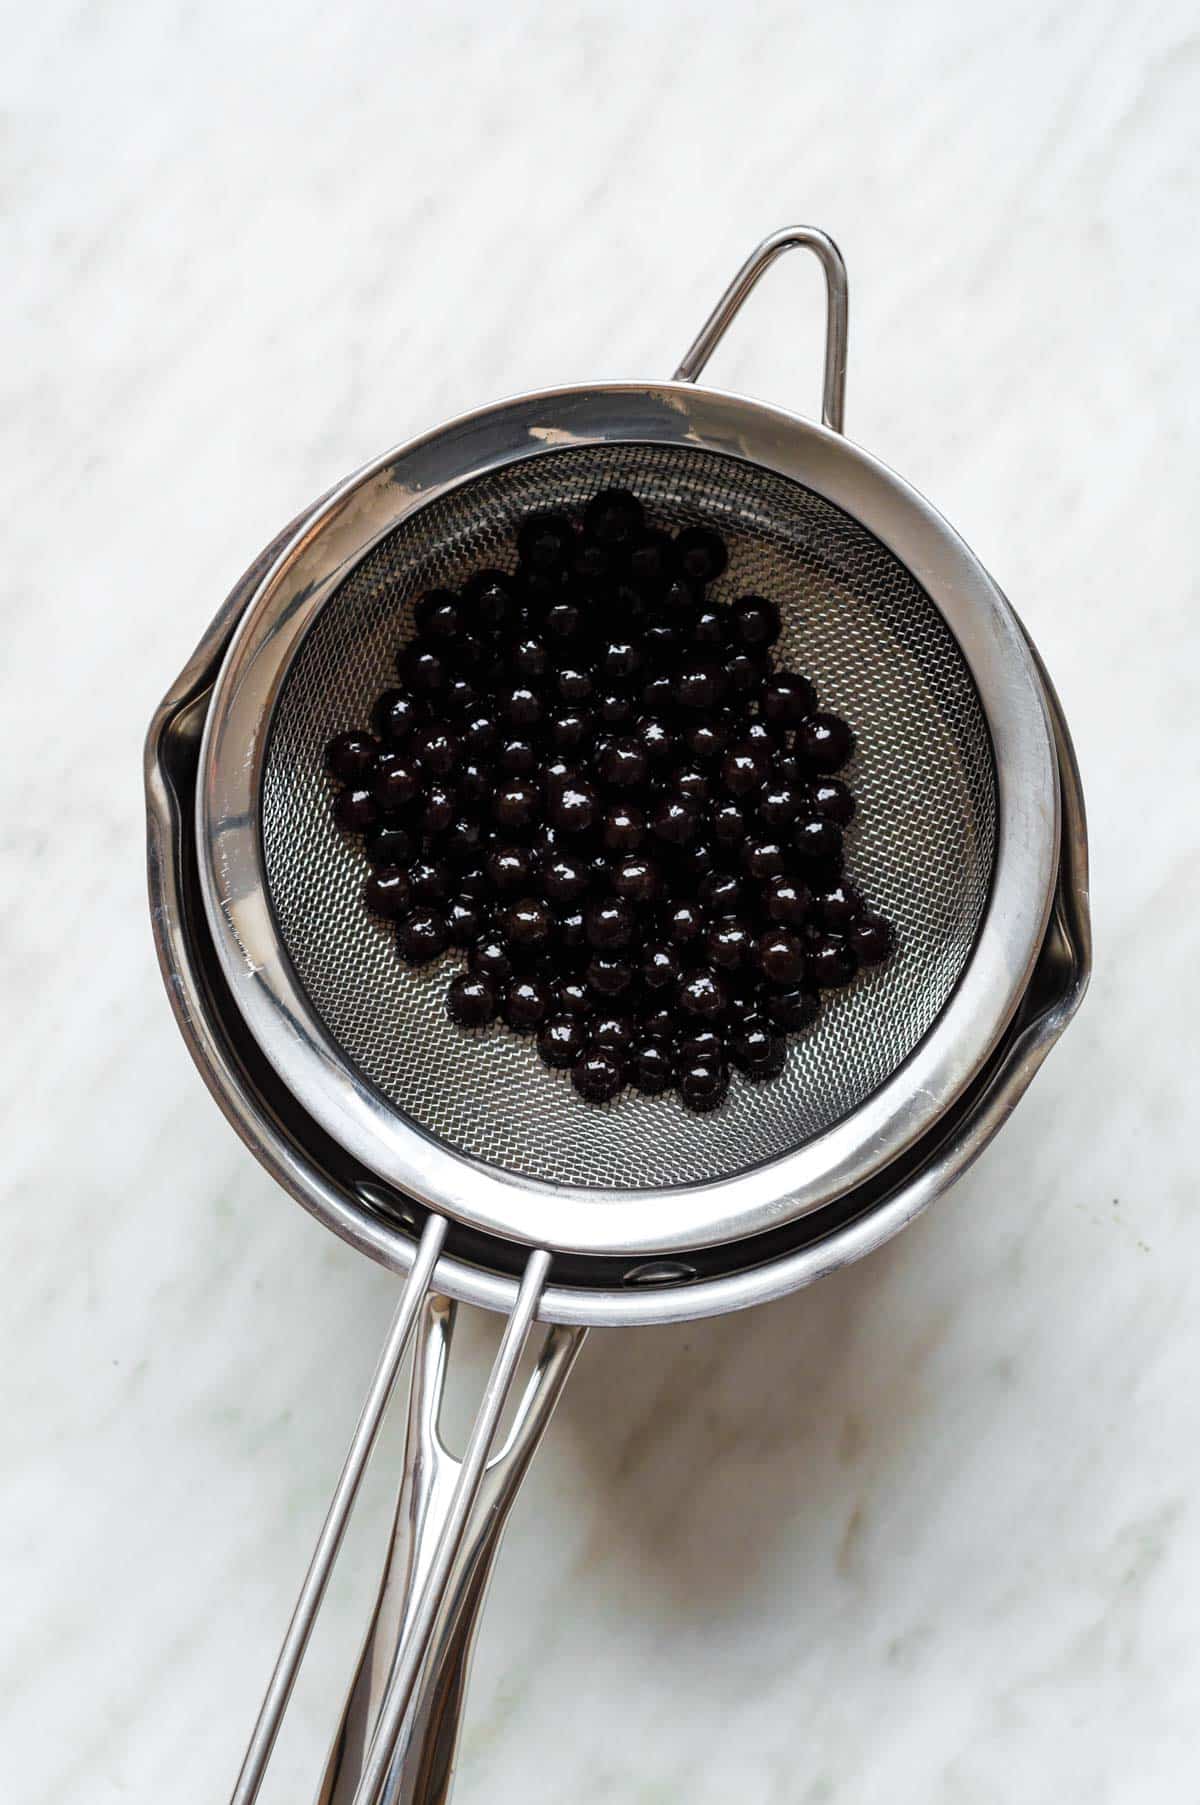 Cooked tapioca pearls draining in a colander.